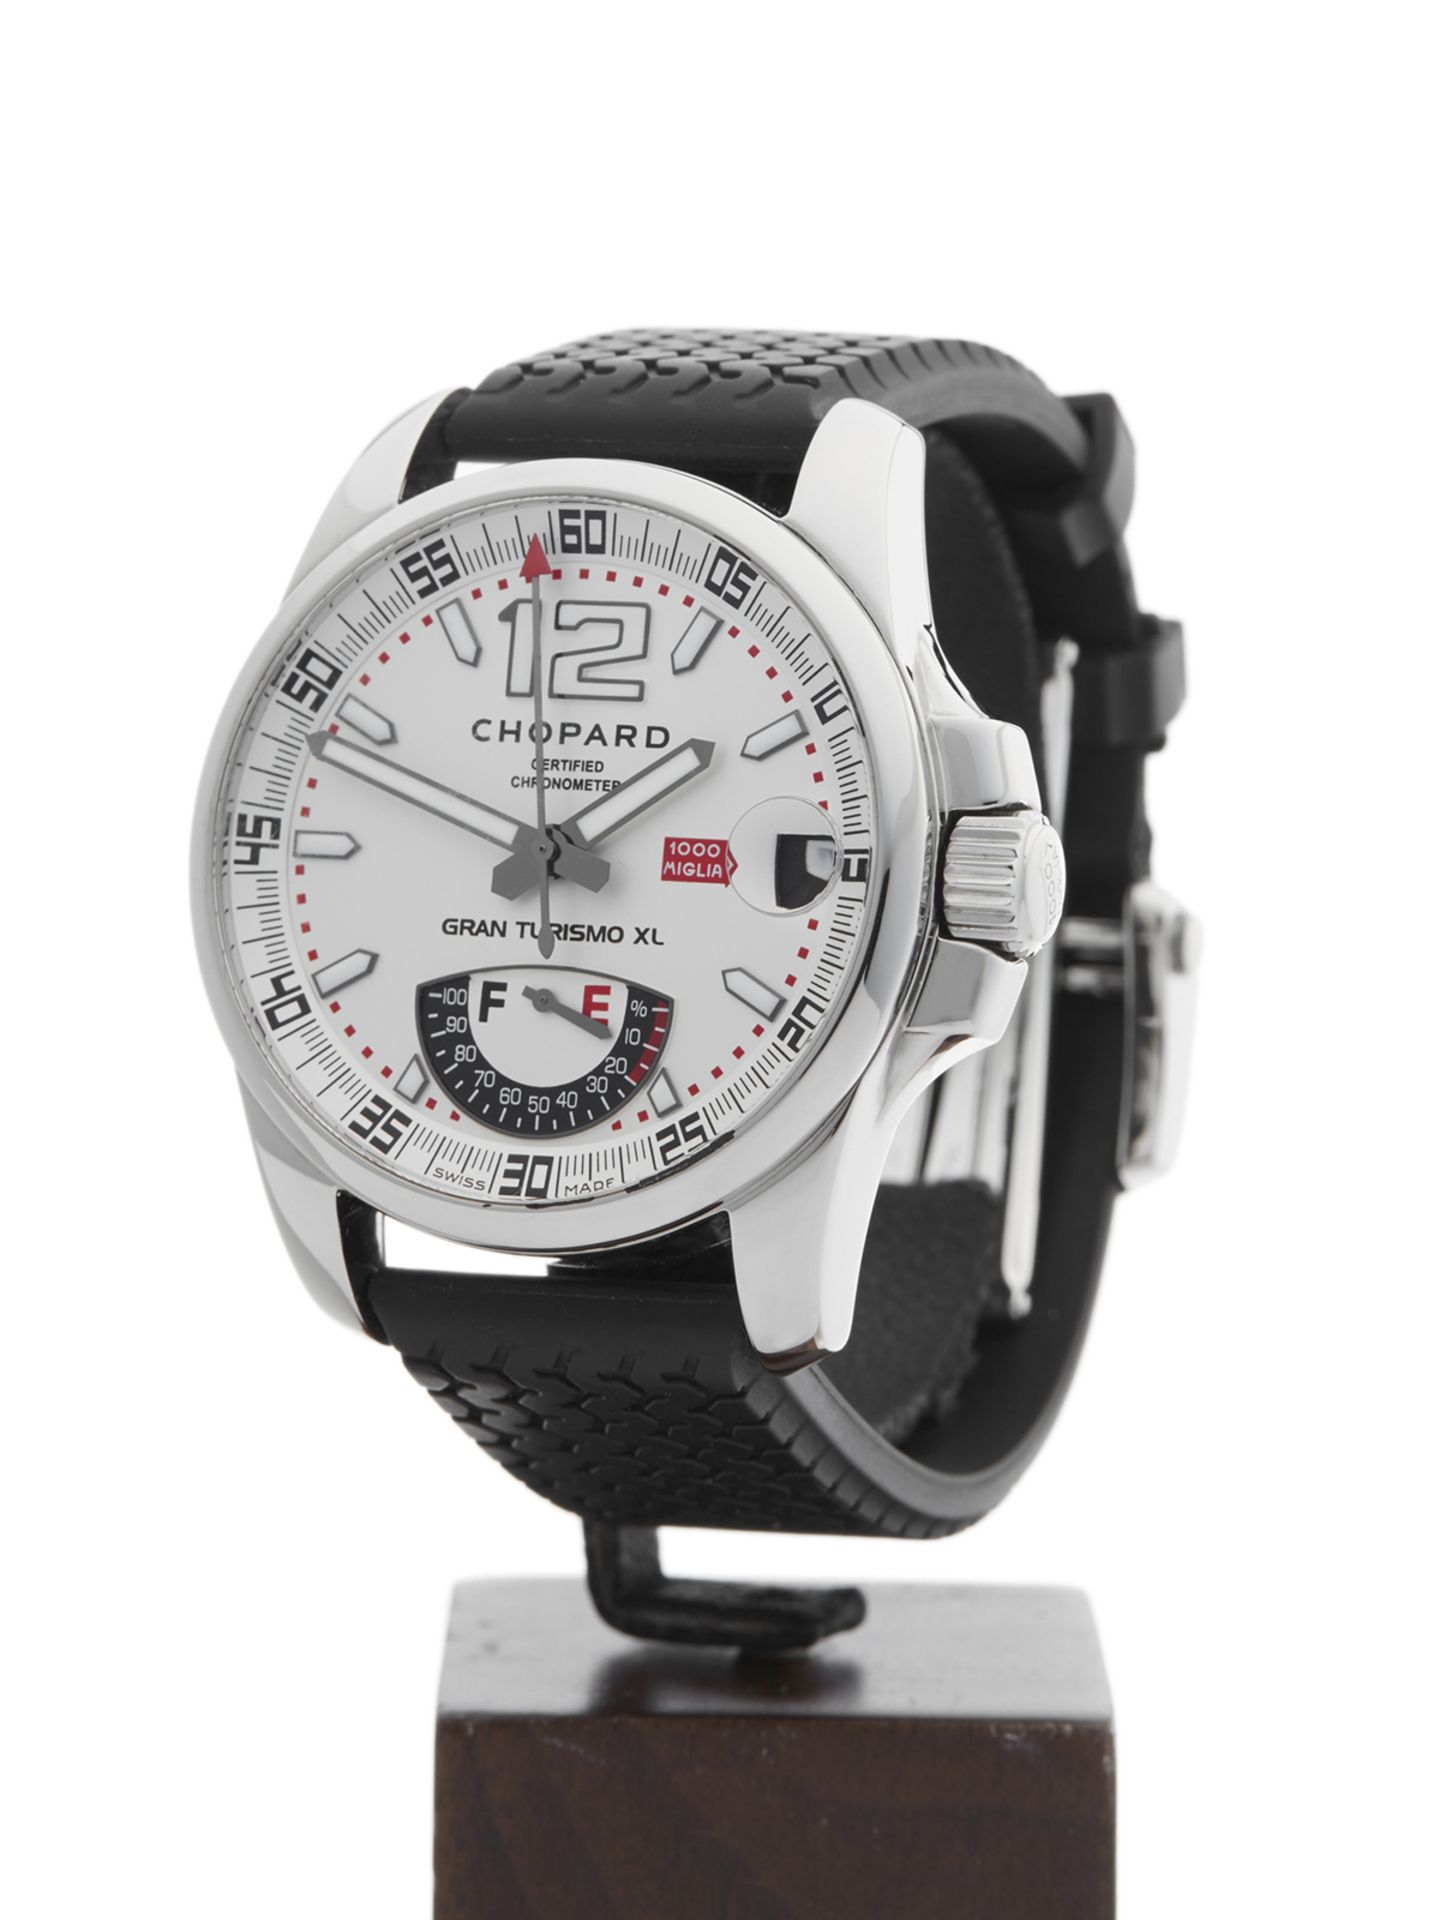 Chopard Mille Miglia - Image 2 of 8